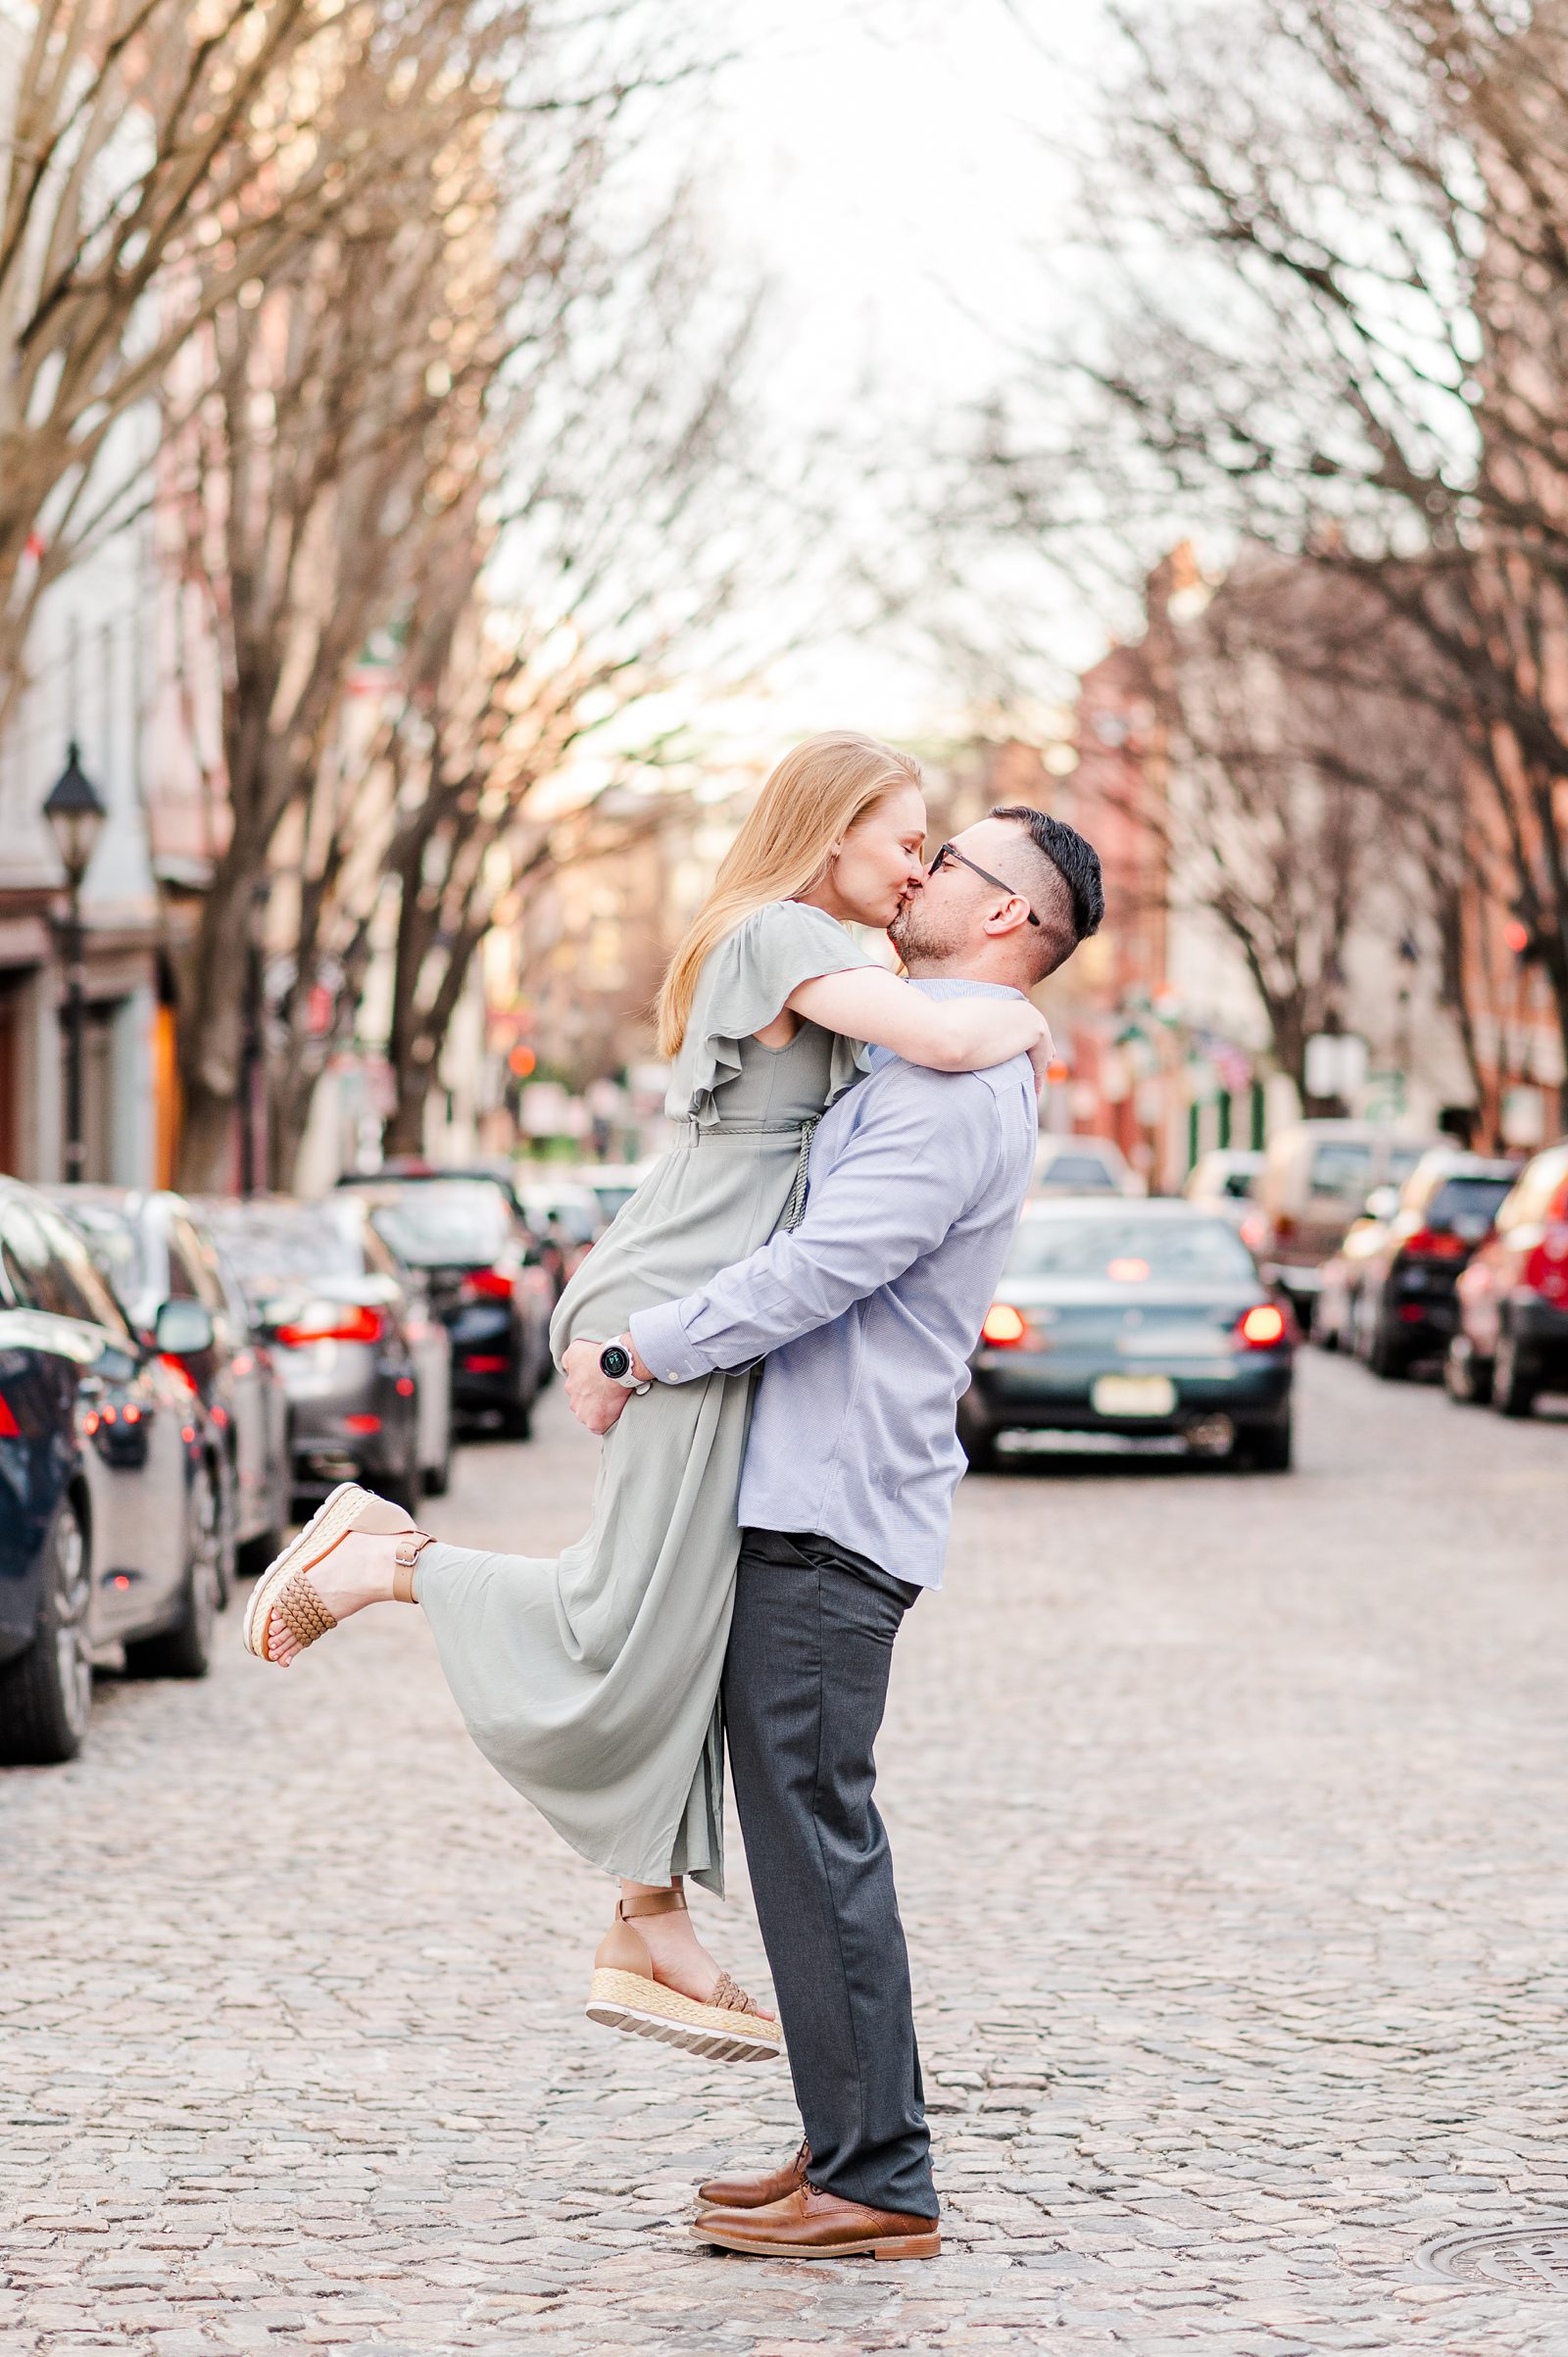 Scissor Kick Kiss in Middle of The Street during Downtown Richmond Engagement Session by Urban Farmhouse. Wedding Photographer Kailey Brianne Photography